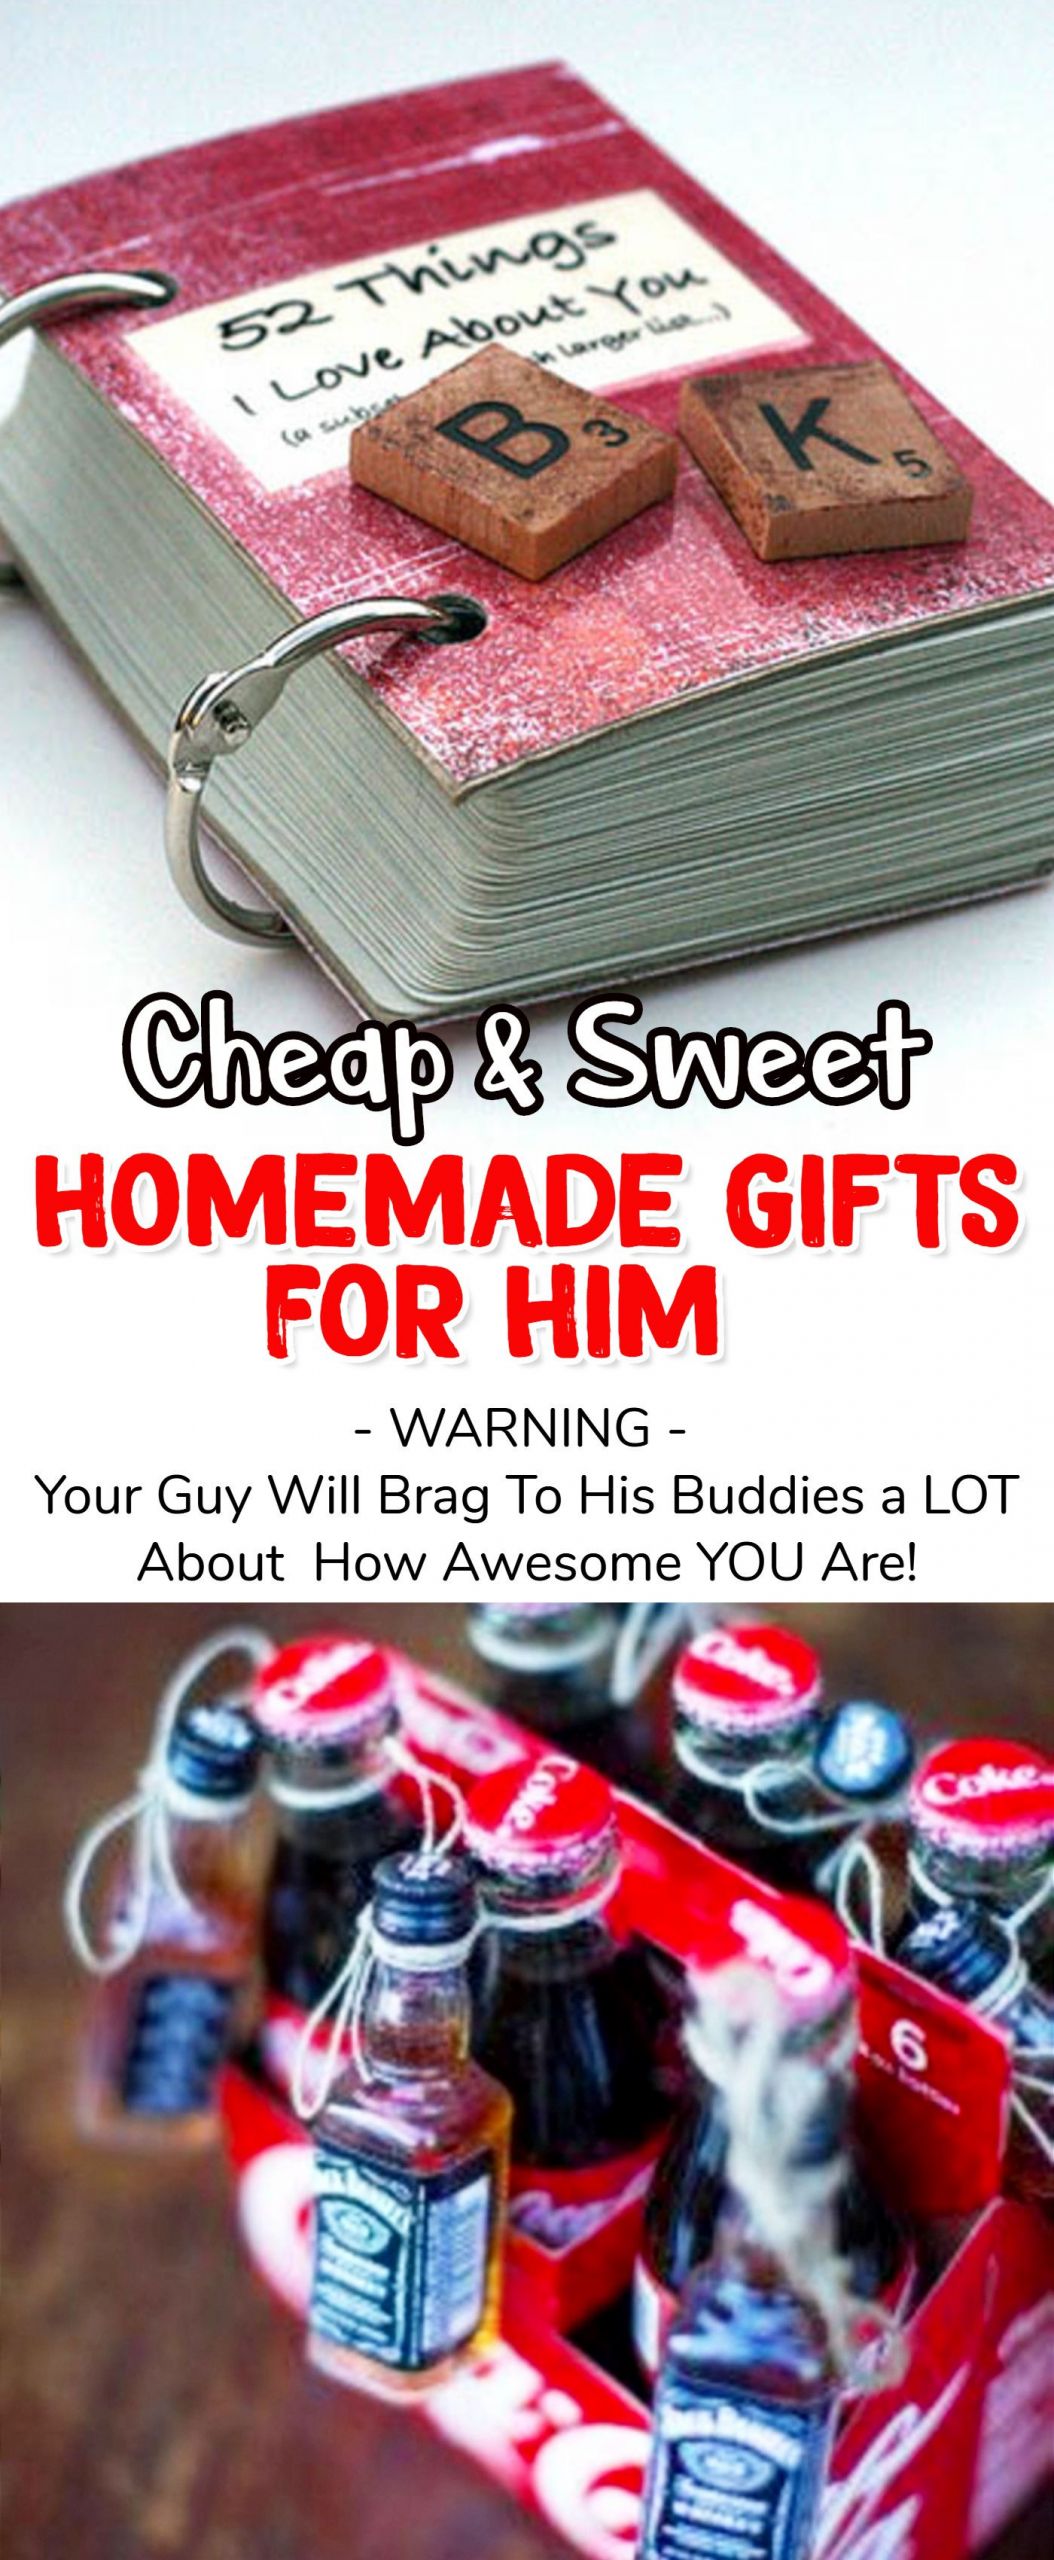 Homemade Valentine Gift Ideas For Guys
 Homemade Gift Ideas For Him 26 Romantic DIY Gifts To